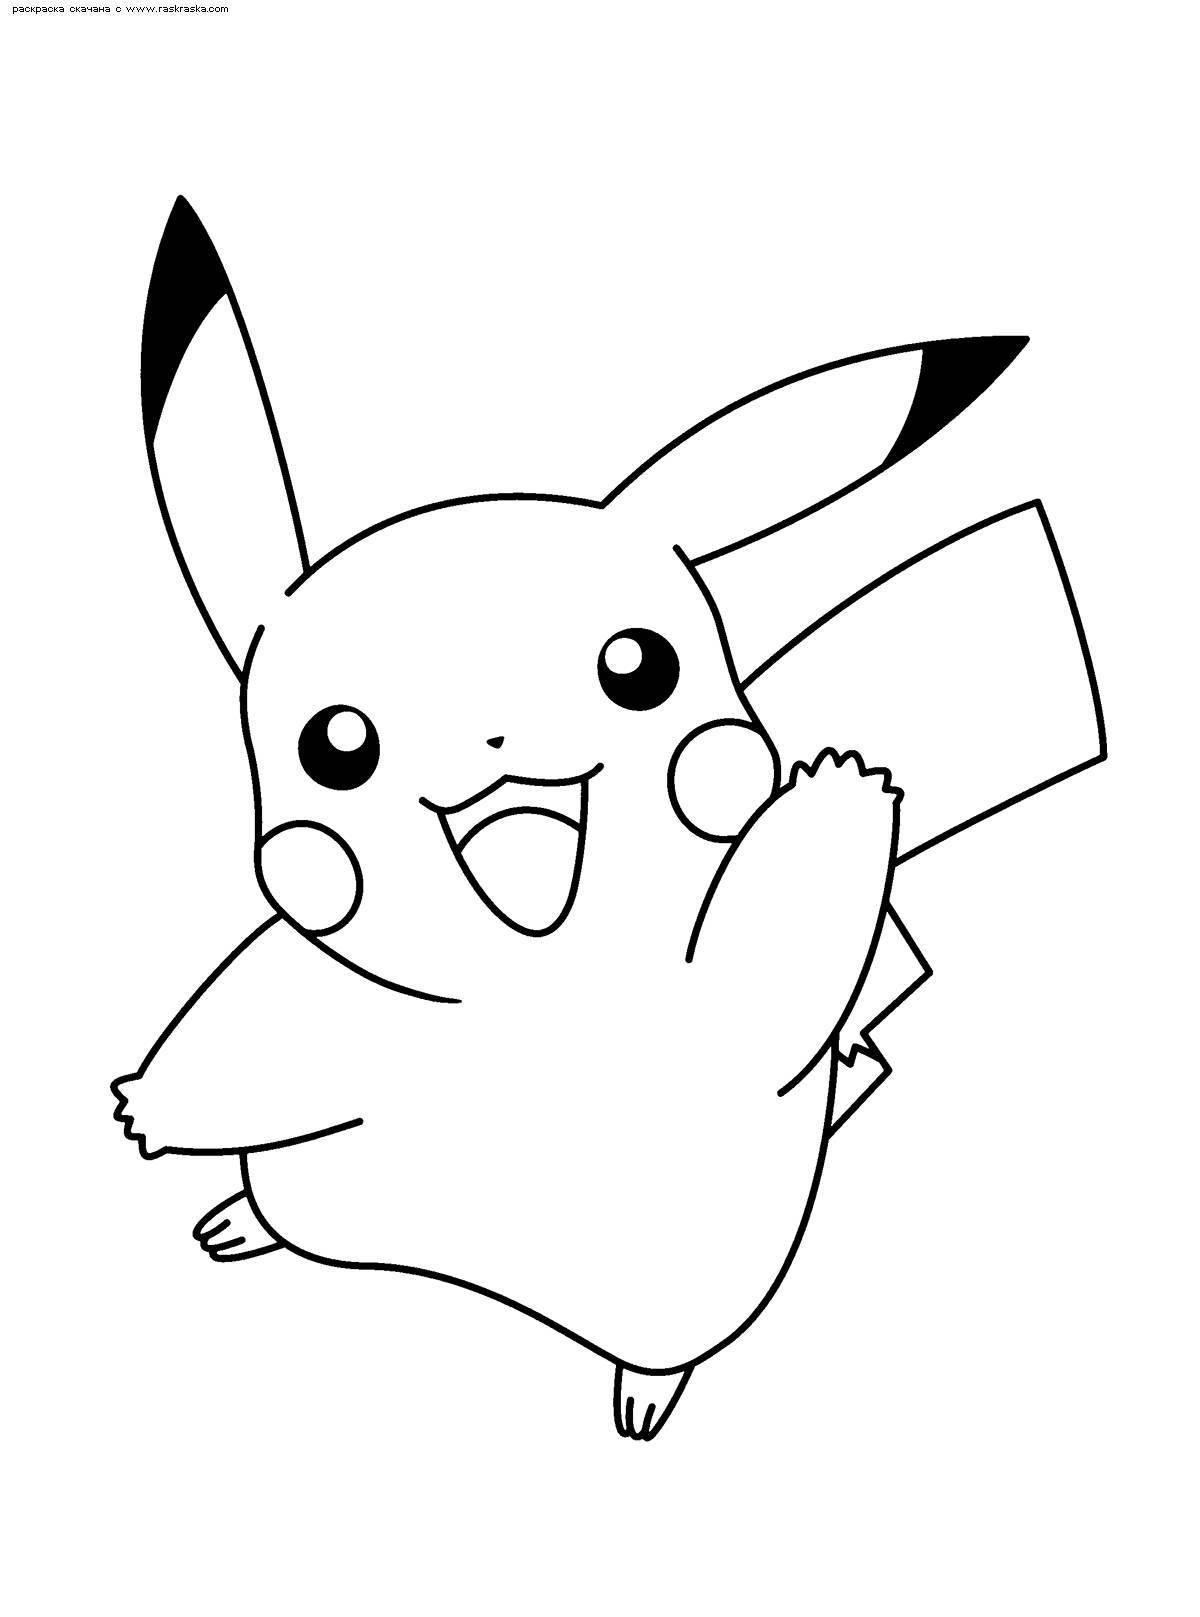 Funny coloring of Pikachu in a cap